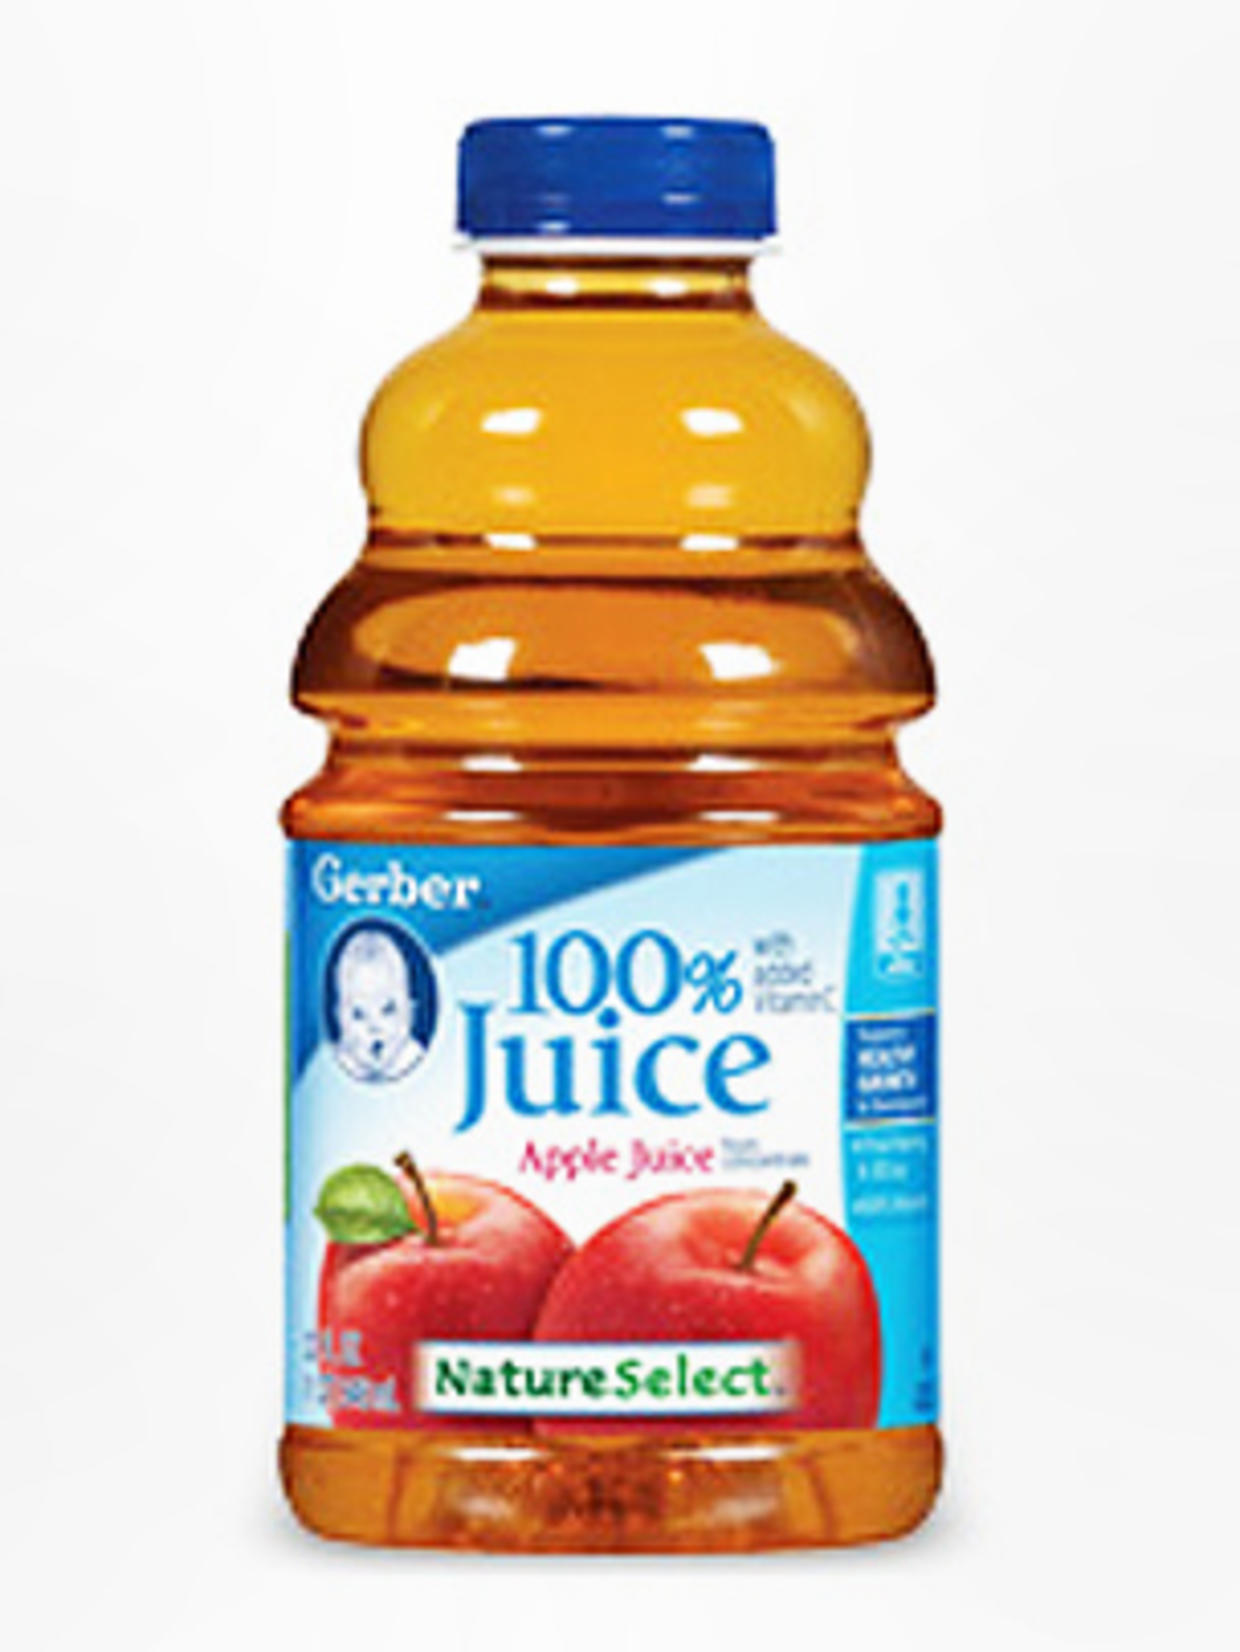 do i need to dilute gerber apple juice